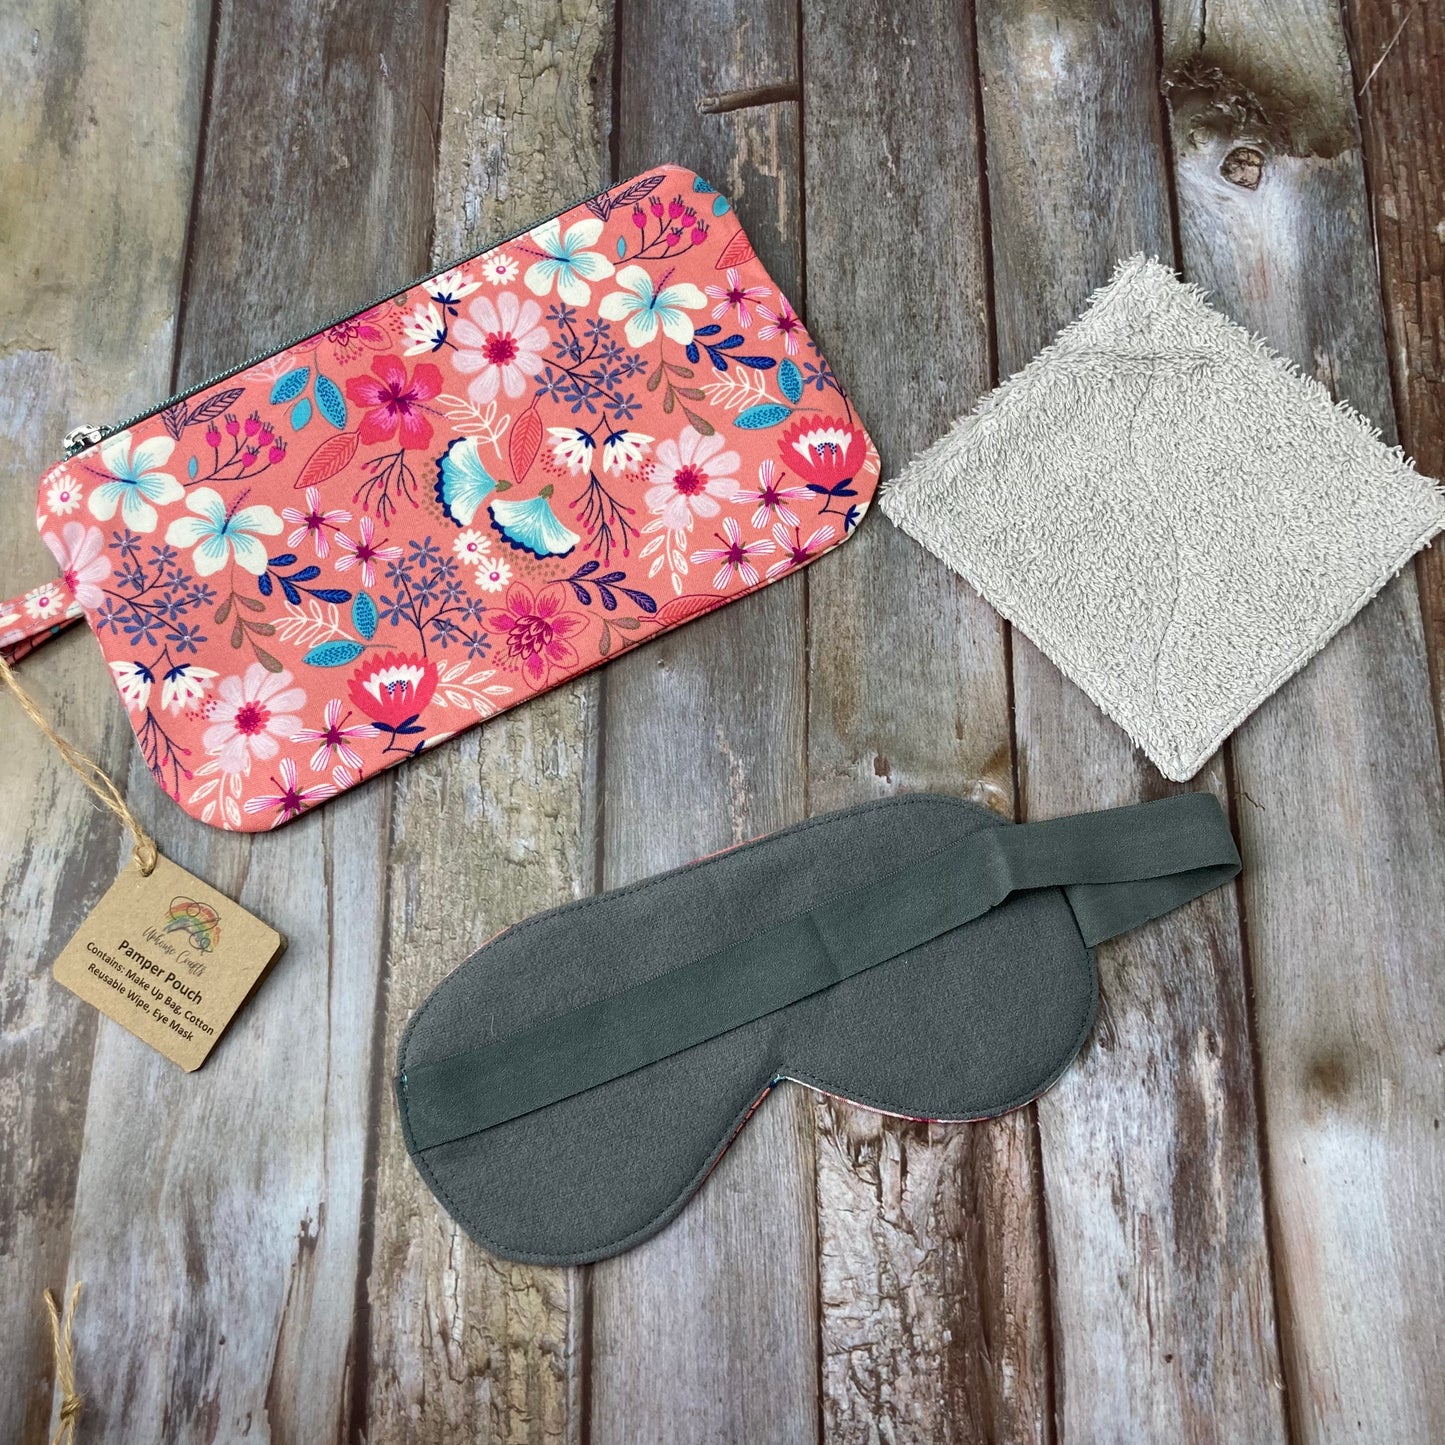 Pamper Pouch Gift Set - Cotton MakeUp Bag Reusable Wipe Sleep Mask - Duck Egg, Coral, Navy, Grey - Uphouse Crafts